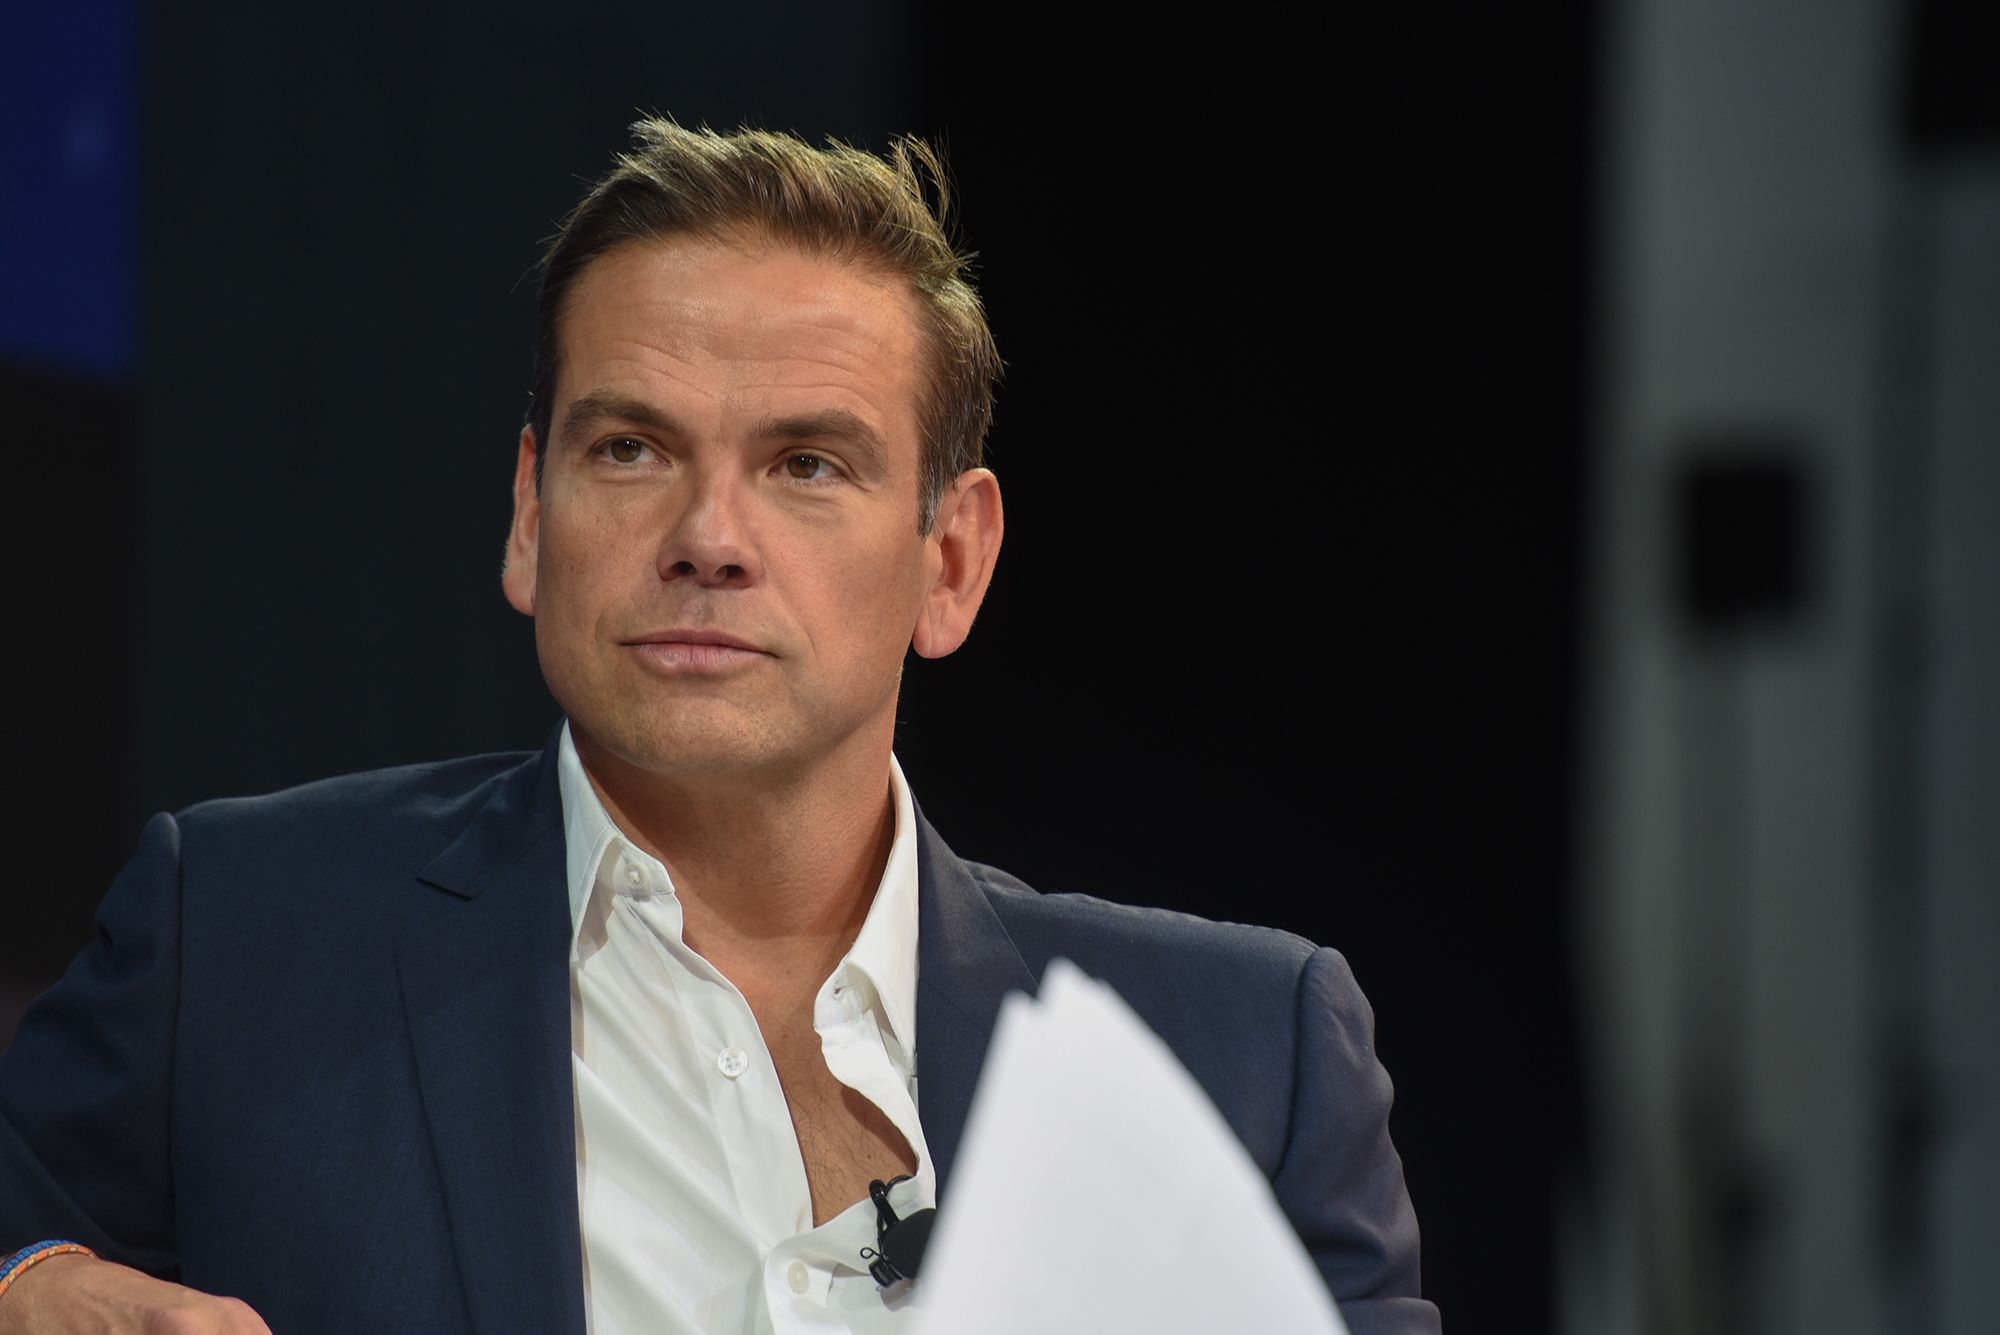 Who is Lachlan Murdoch, the new chairman of Fox and News Corp? | CNN Business